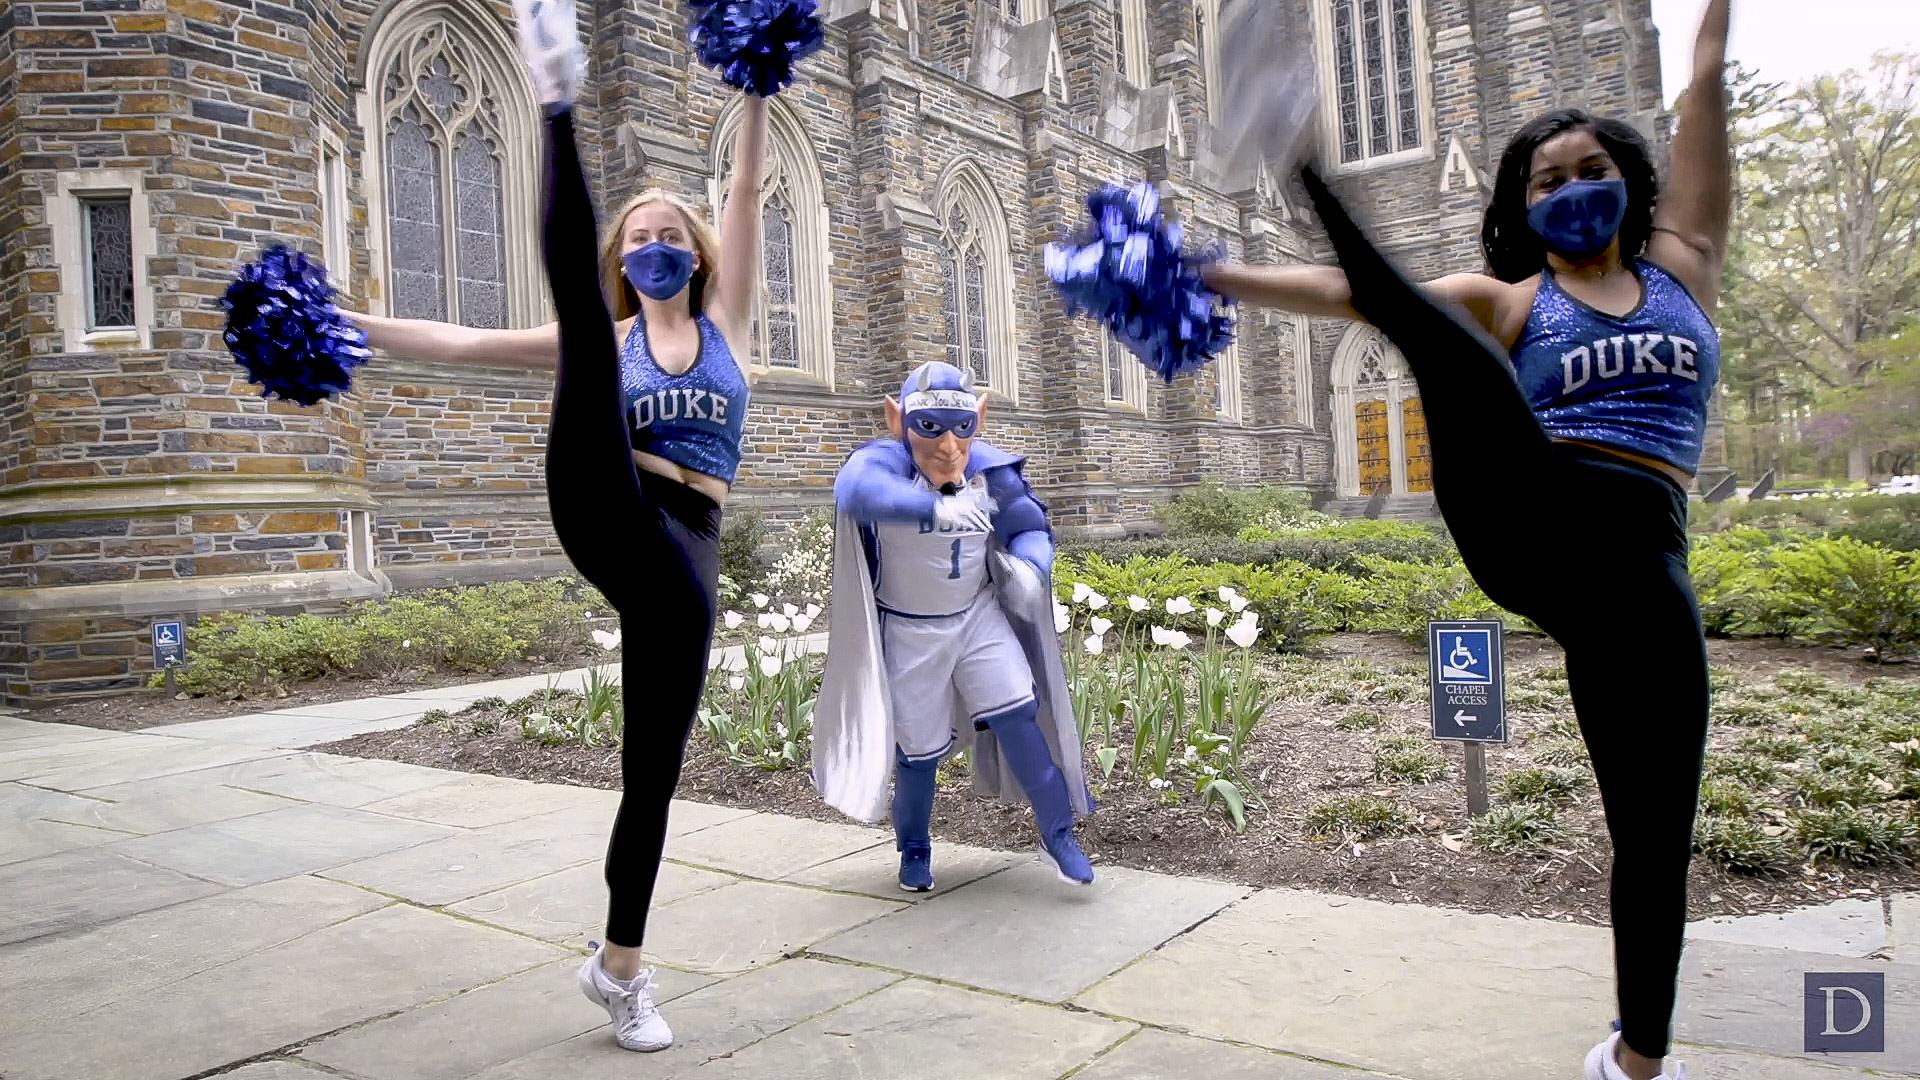 Dancing Devils seniors Hannah Folks and Alyssa Nicholas perform with the Blue Devil during our filming session.